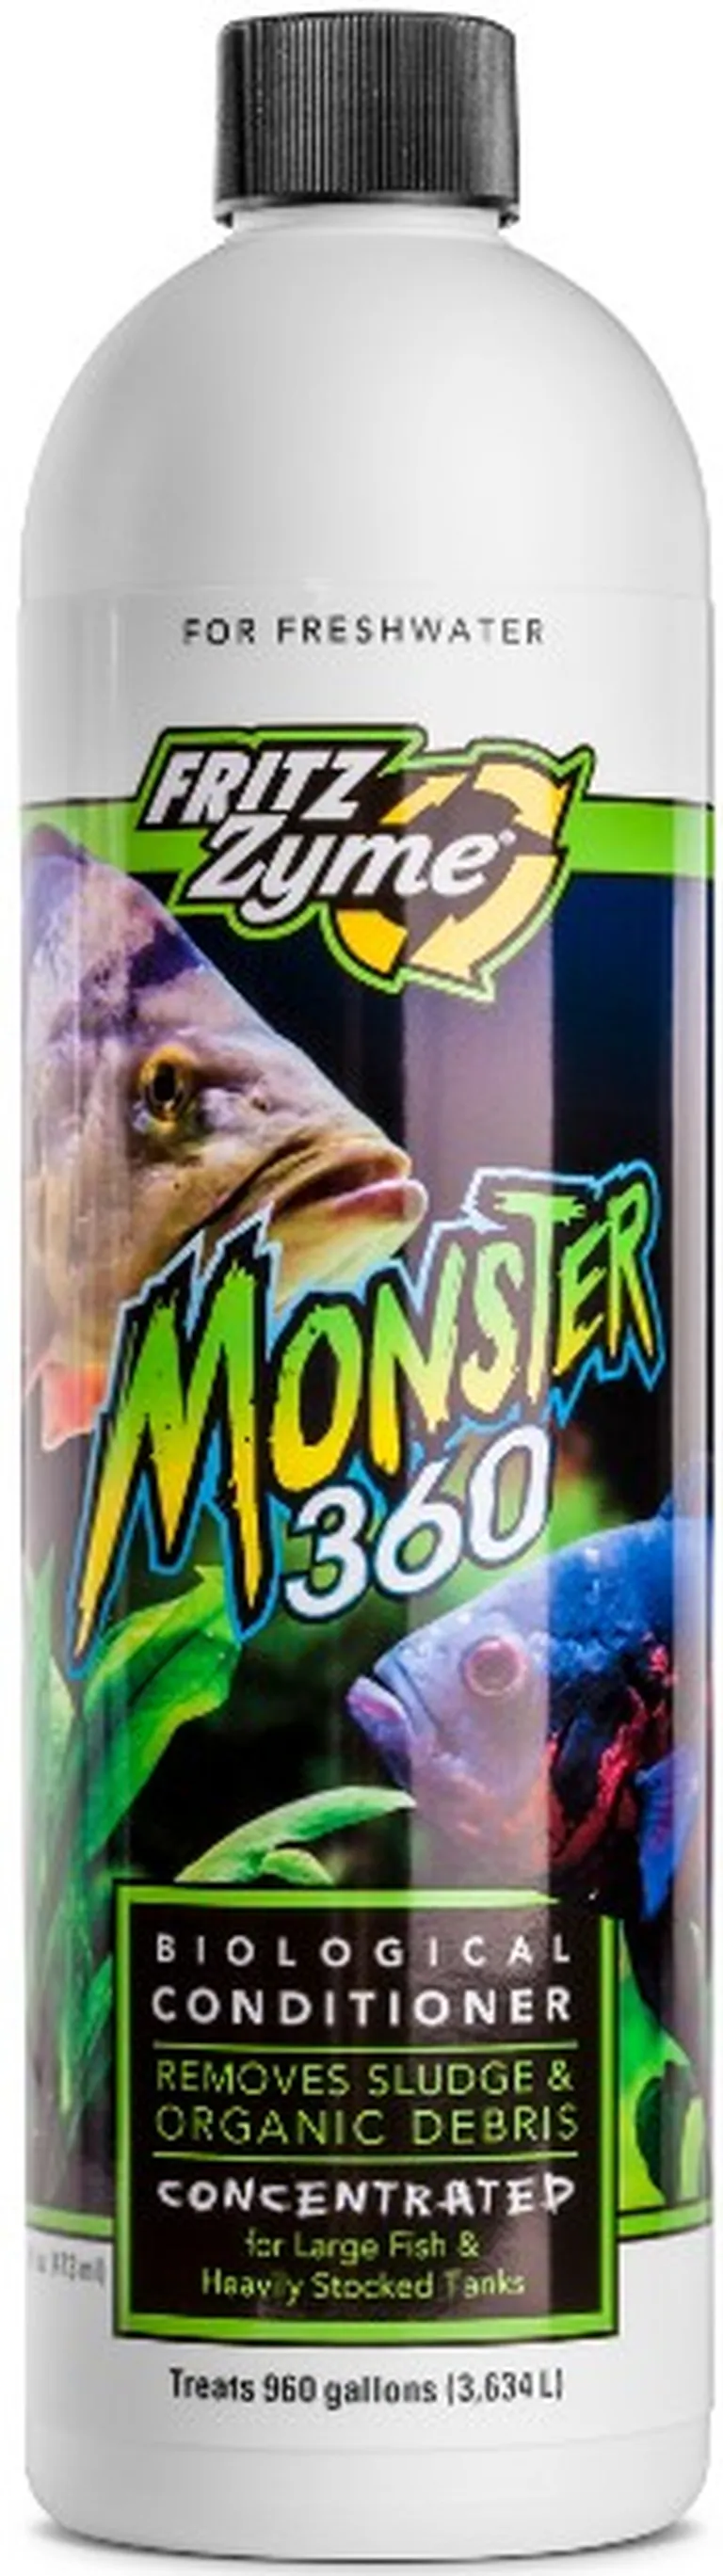 Fritz Aquatics Monster 360 Concentrated Biological Conditioner for Freshwater Photo 2